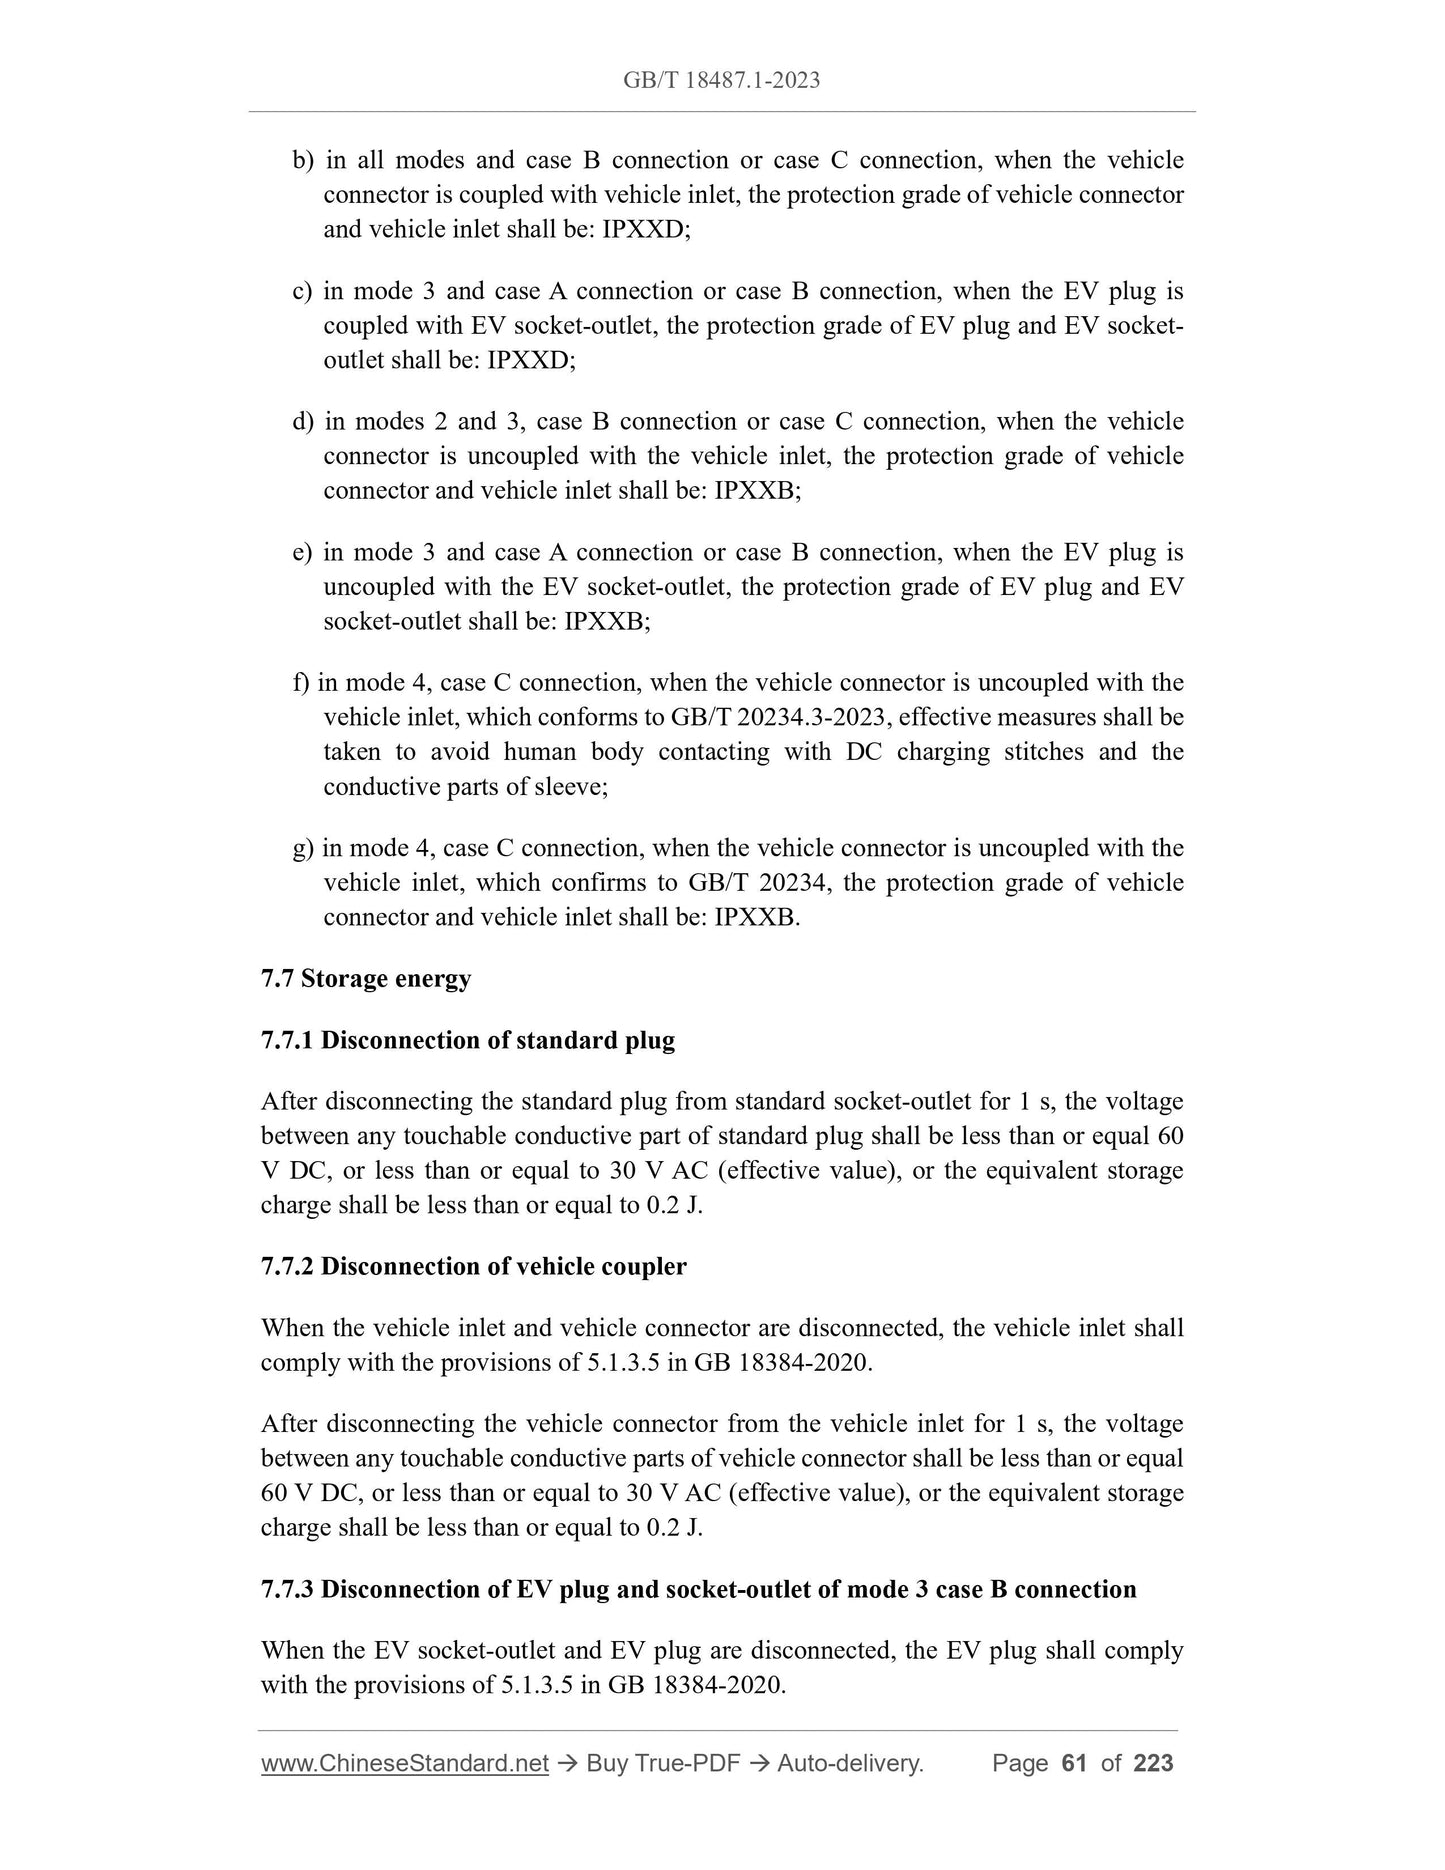 GB/T 18487.1-2023 Page 11